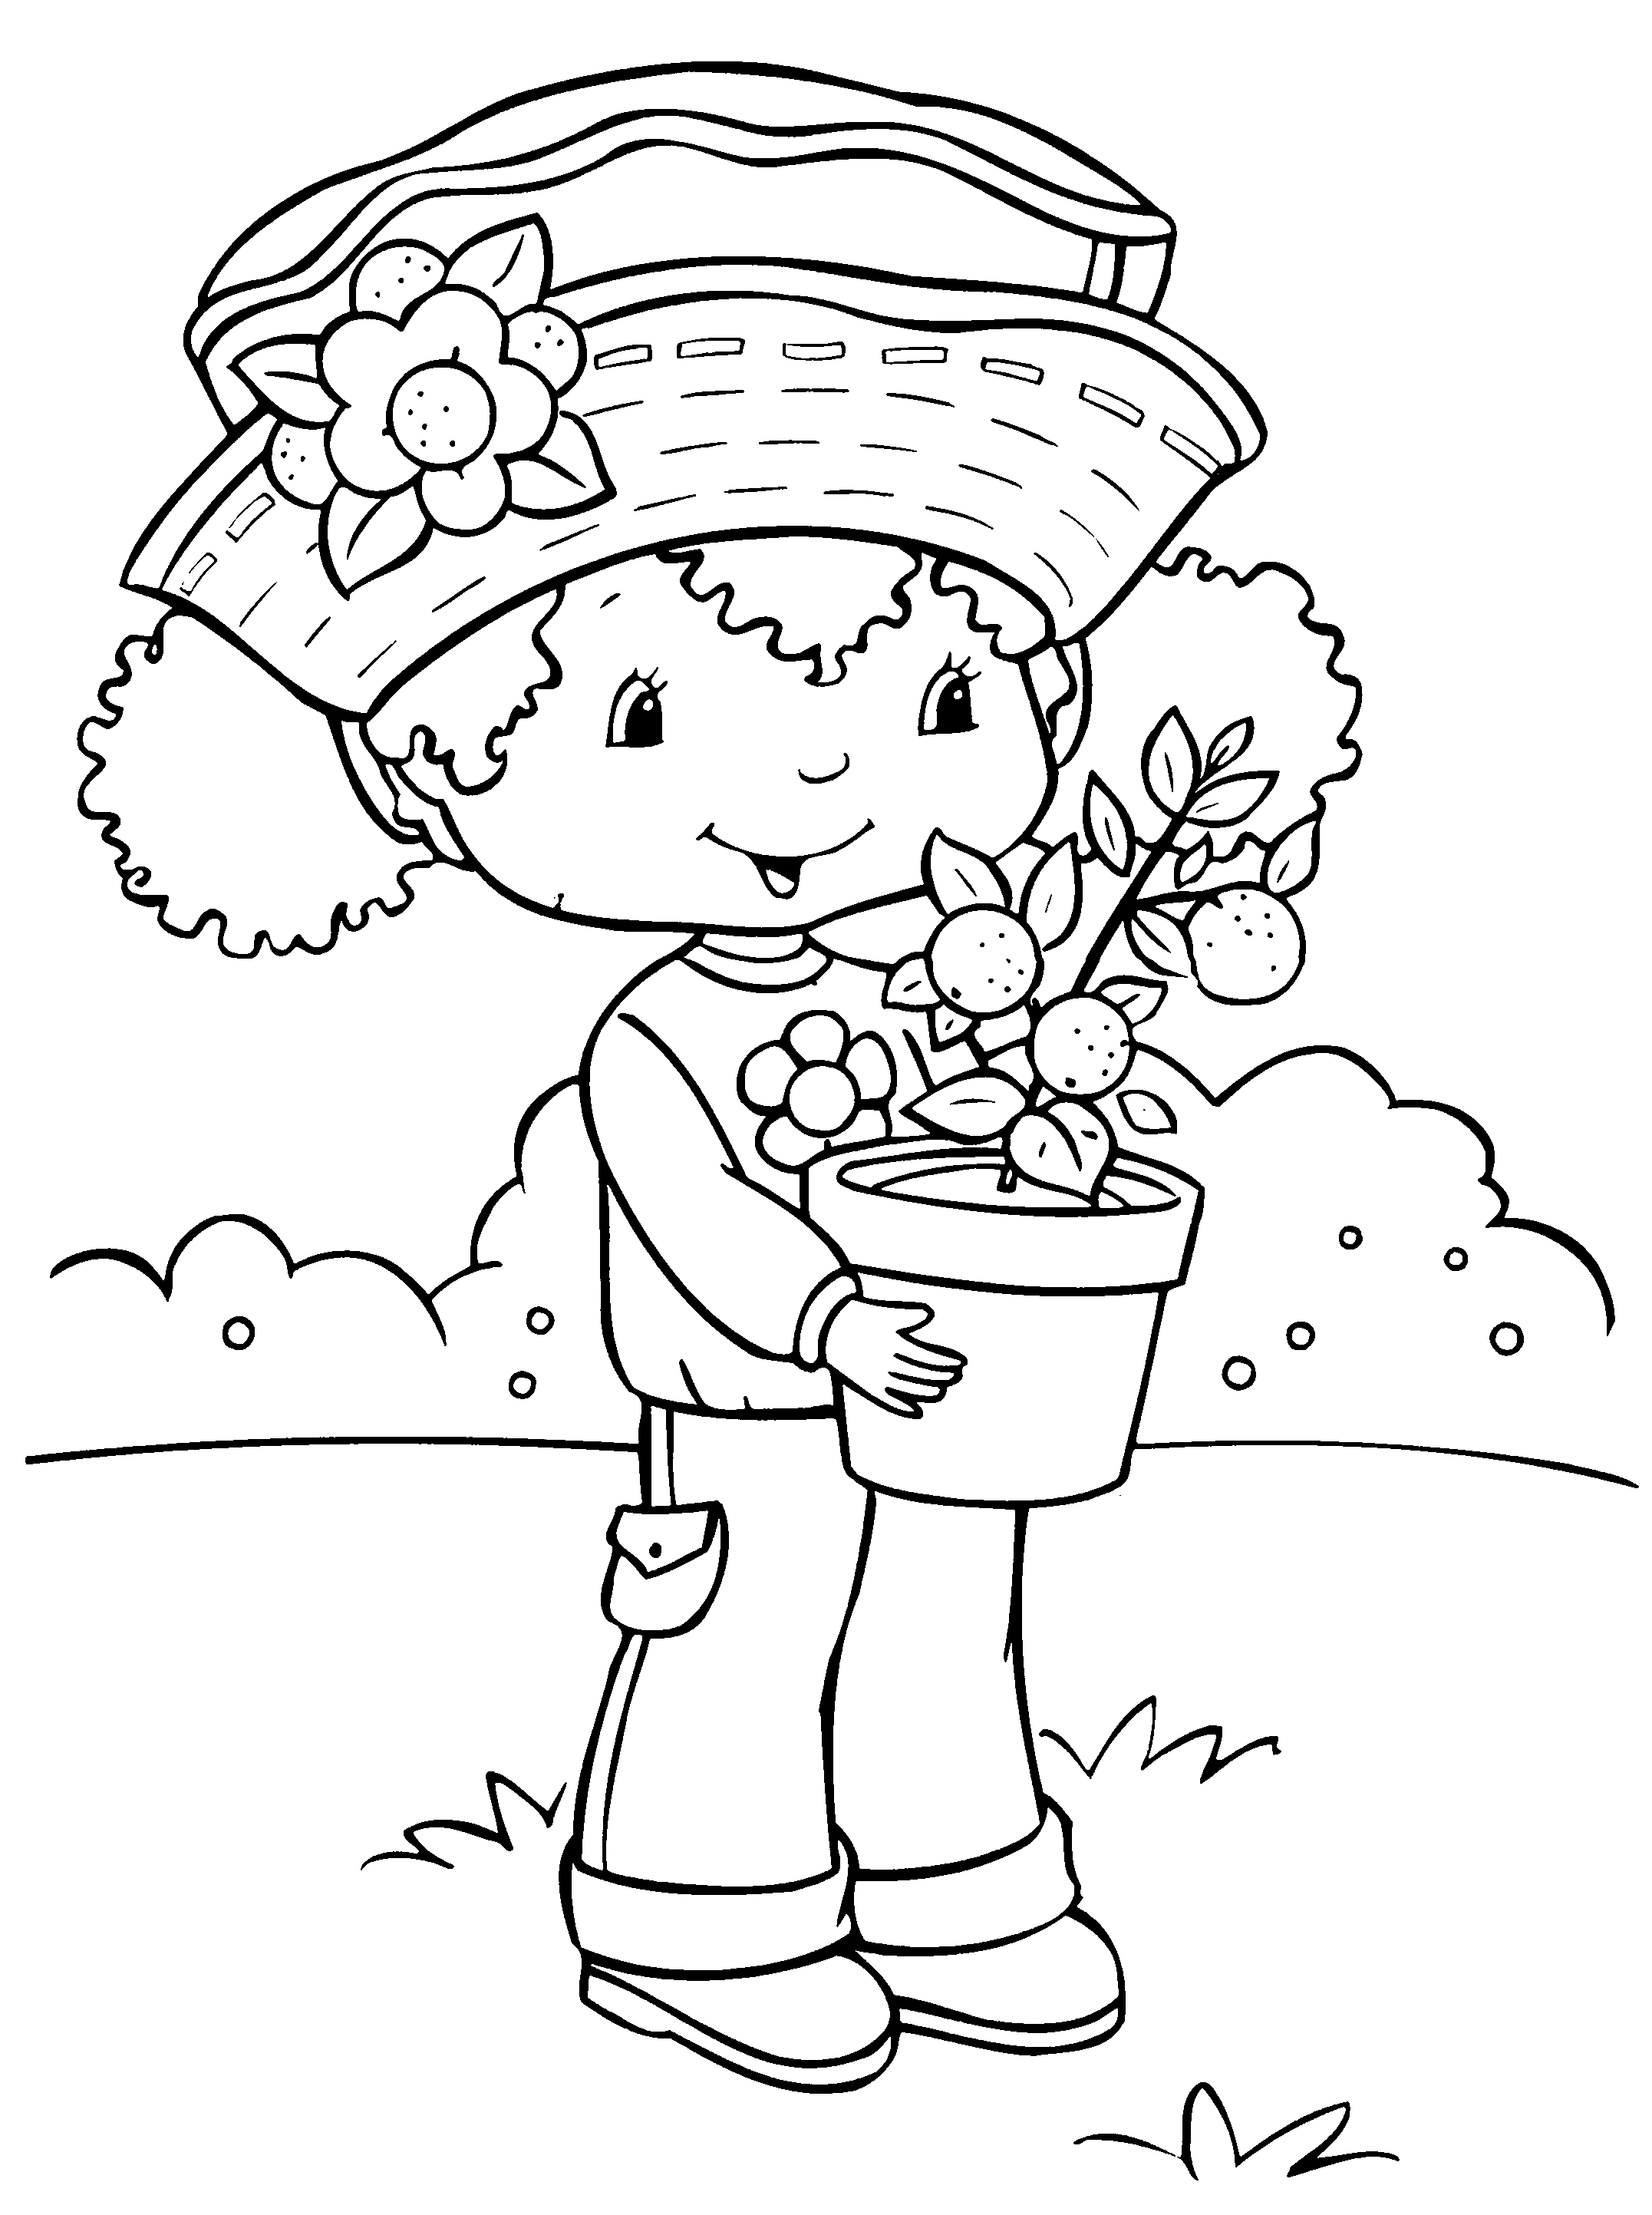 Skating Strawberry Shortcake Coloring Page - Free Printable Coloring Pages  for Kids